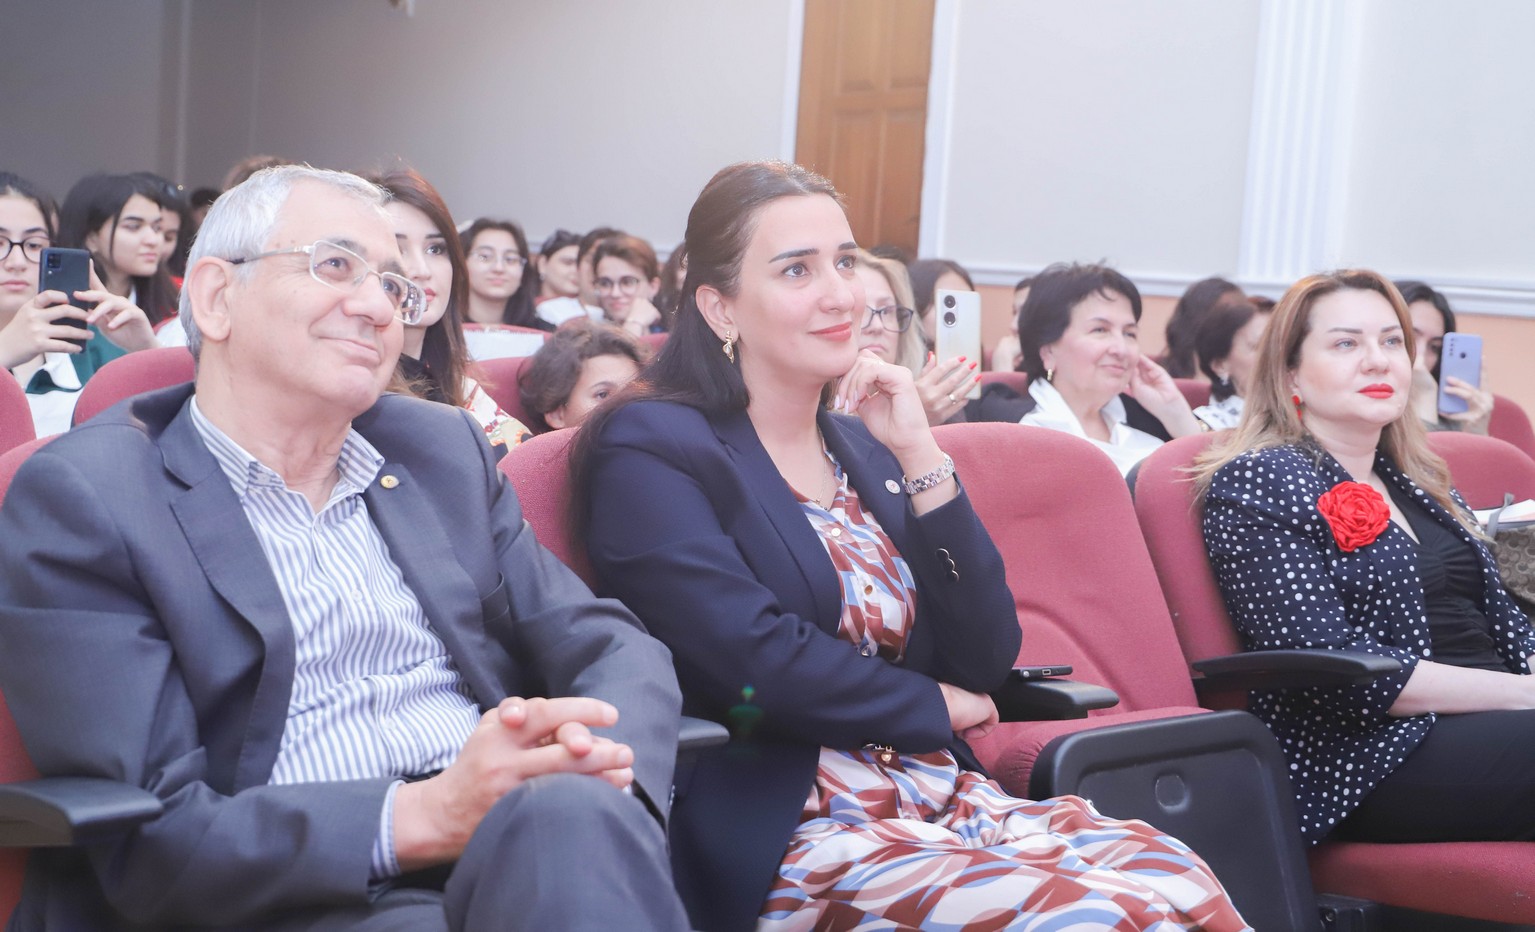 The 460th birthday anniversary of William Shakespeare was celebrated at Khazar University